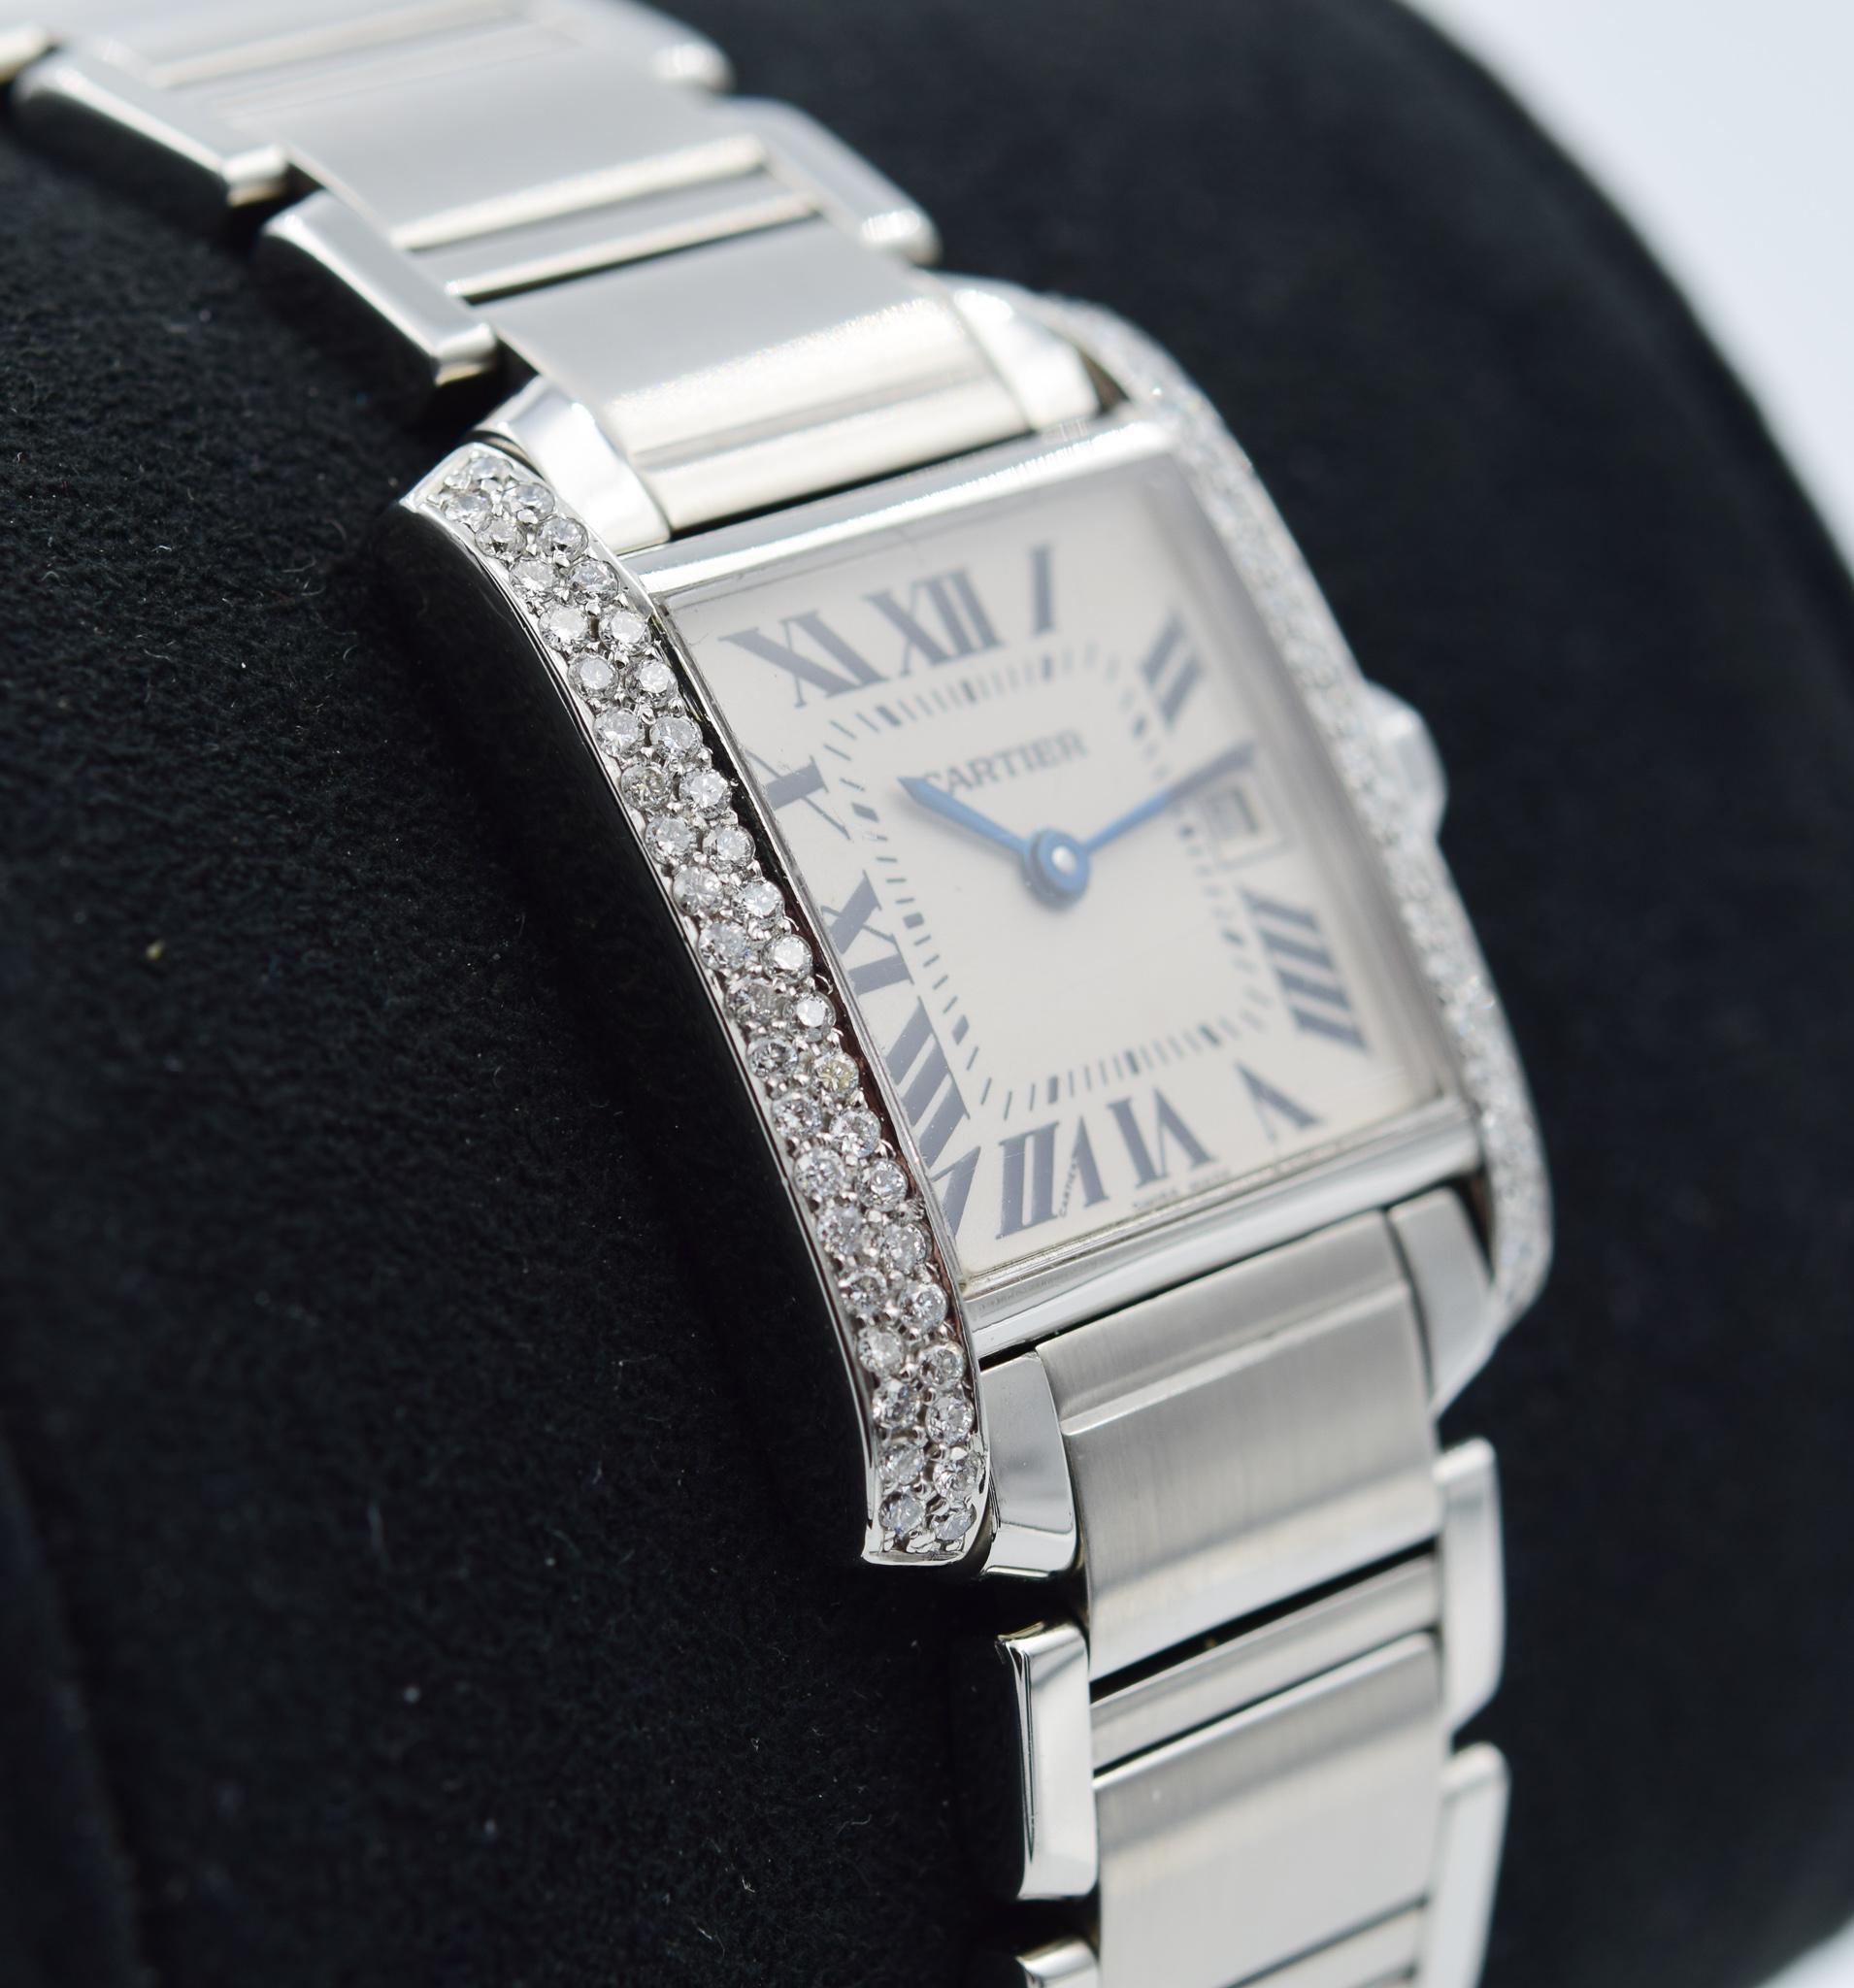 This Cartier Tank Francaise was recently traded in to our store and is in good condition with some normal indications of wear. This watch has a diamond aftermarket modification for the bezel down each side of the case. There are scratches on the